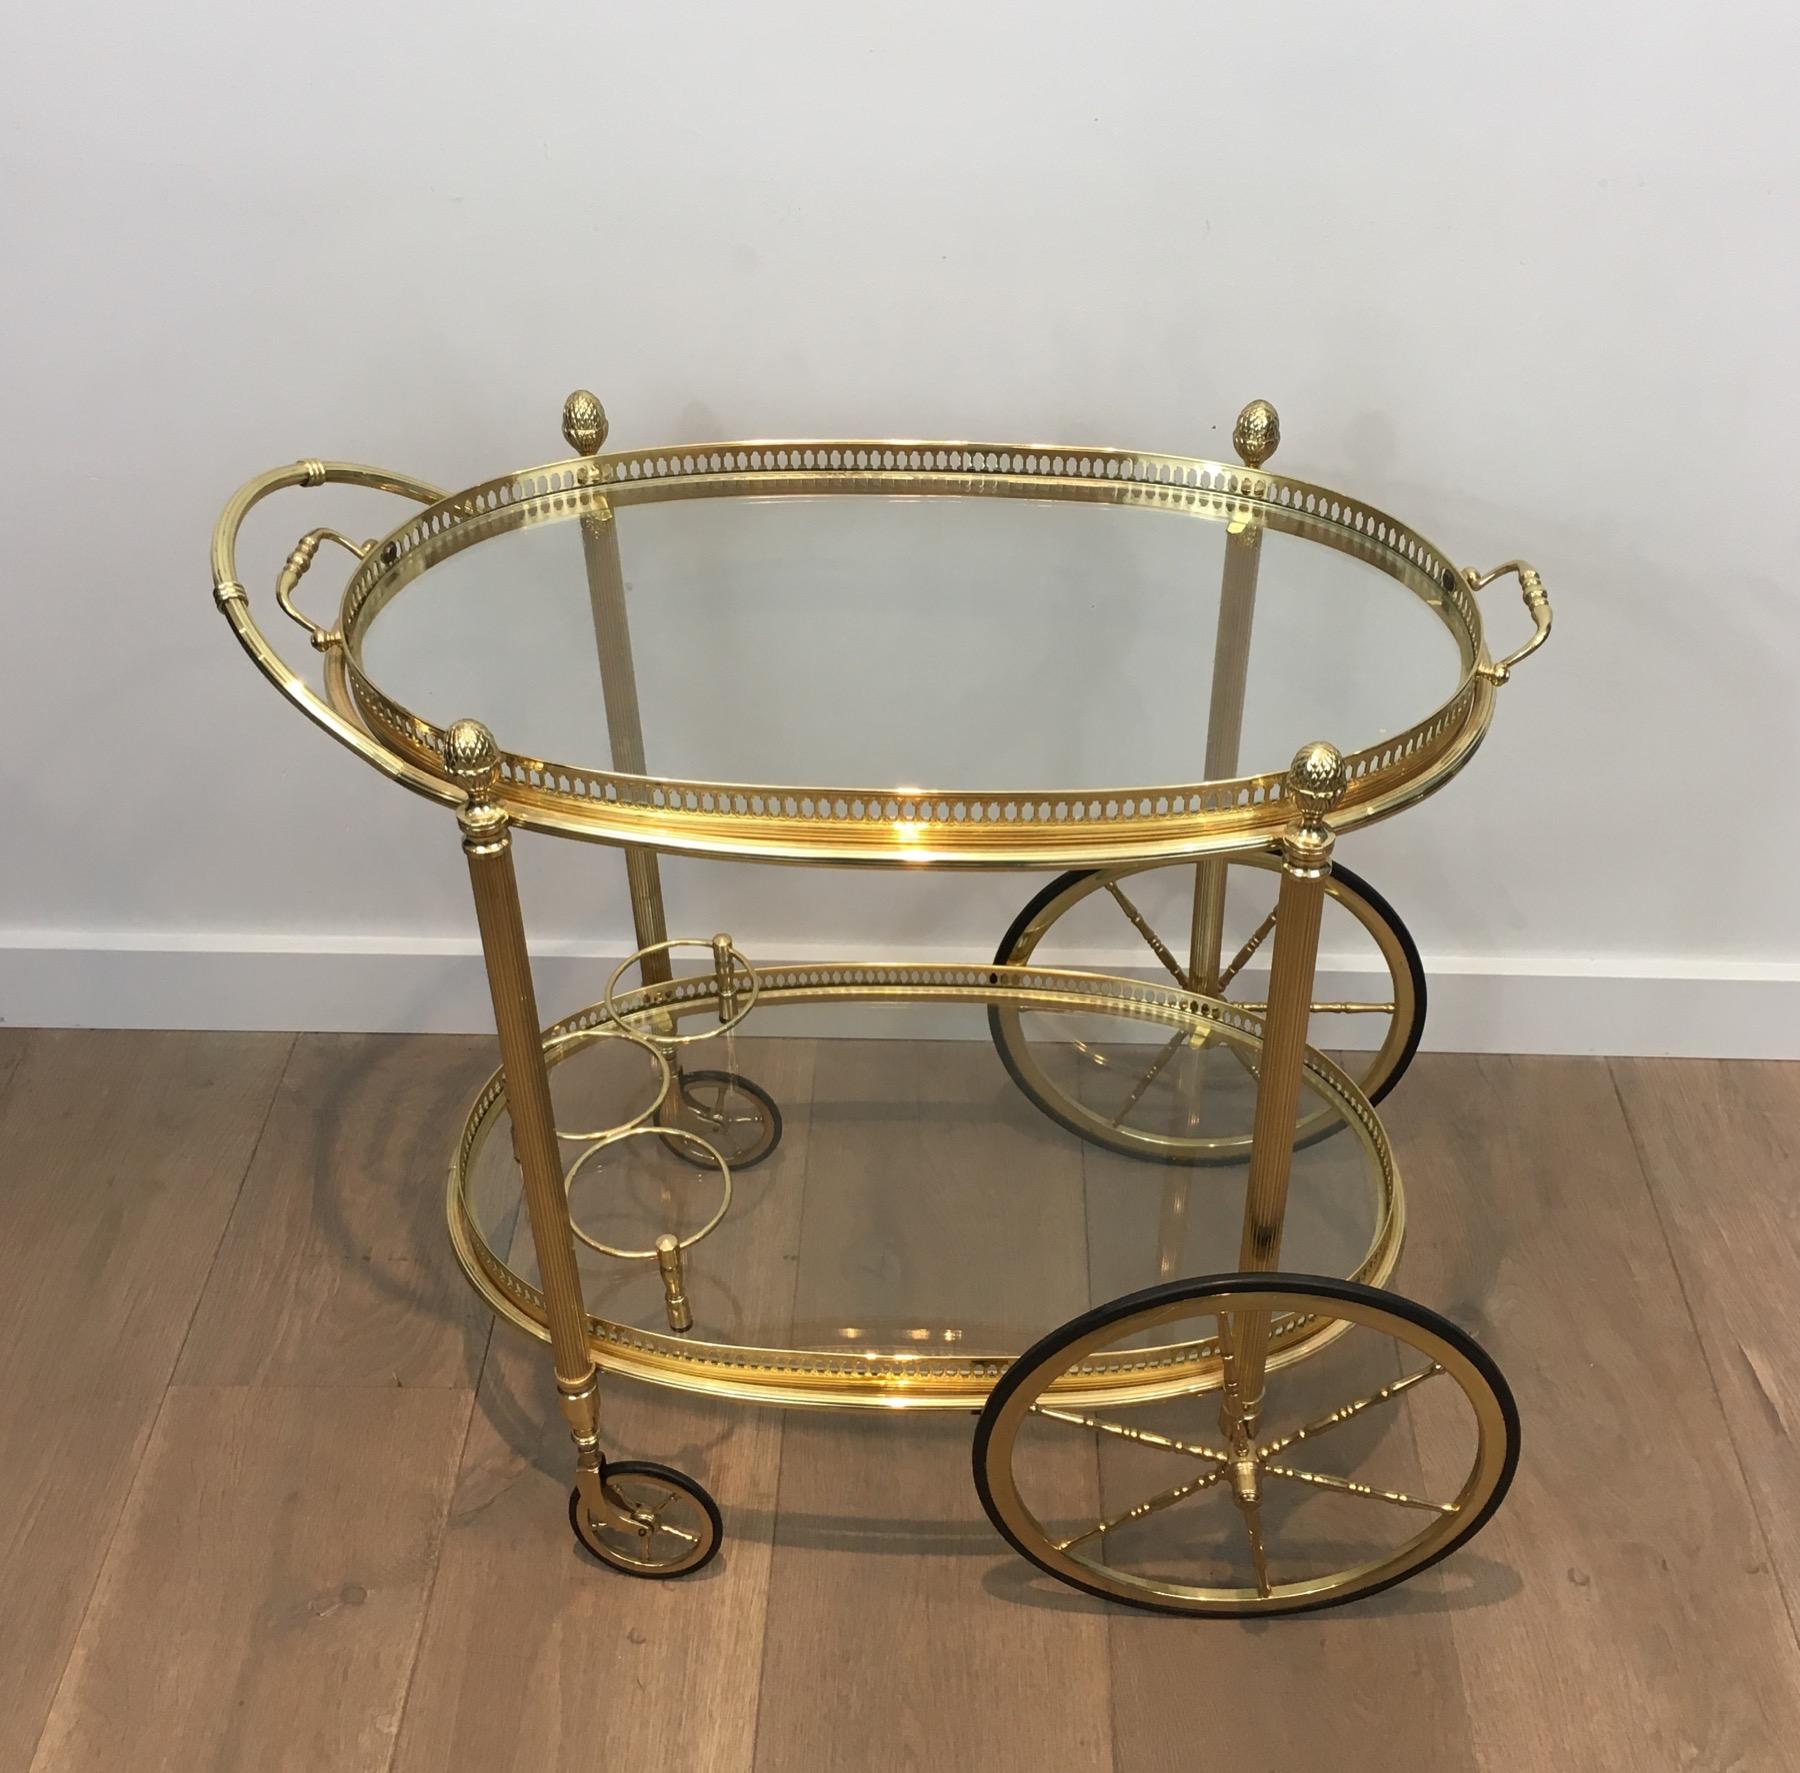 This very nice and elegant neoclassical Style Oval Drinks Trolley is all made of brass with fluted legs, large finials and removable glass trays. This is a French work by Maison Bagués. Circa 1940